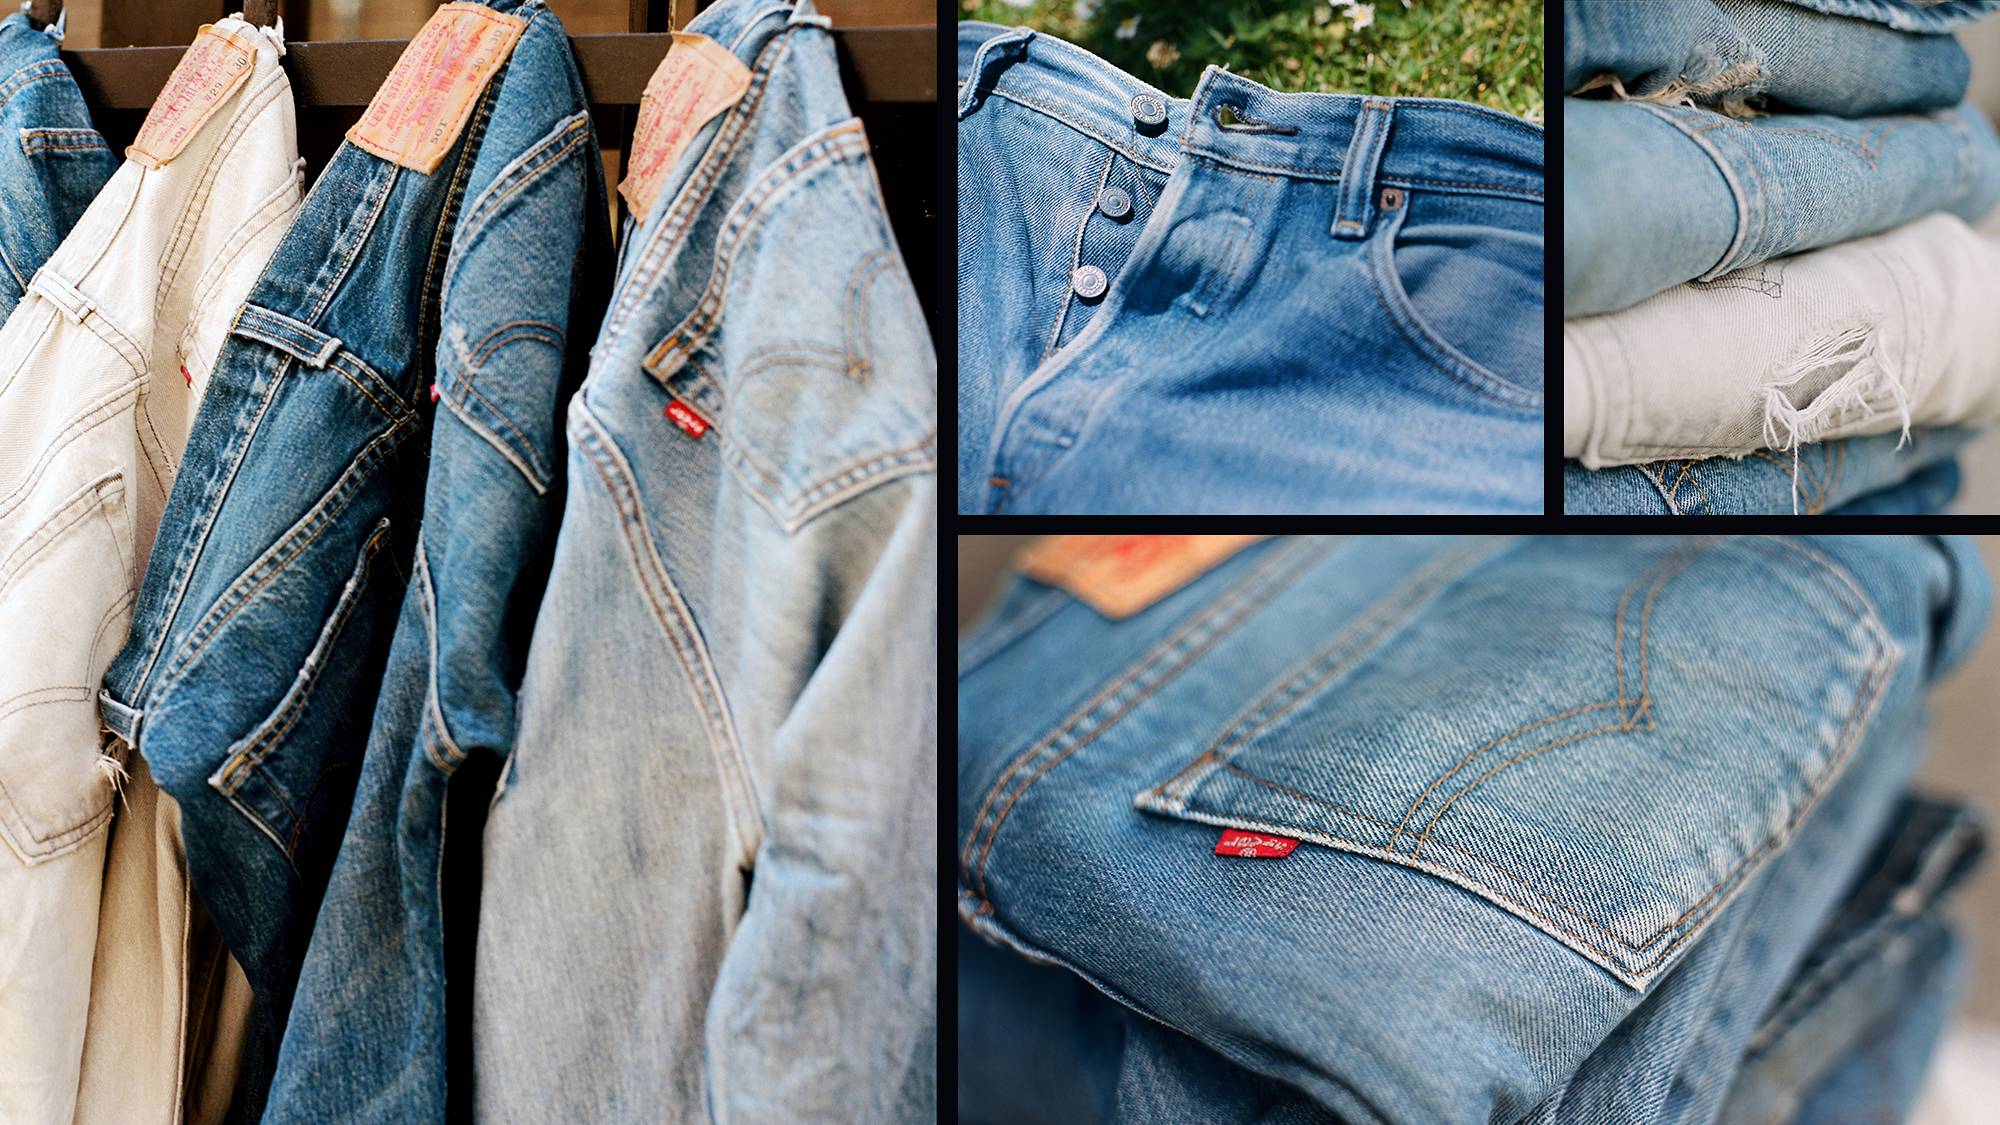 How to Distress Jeans at Home - The Right Way